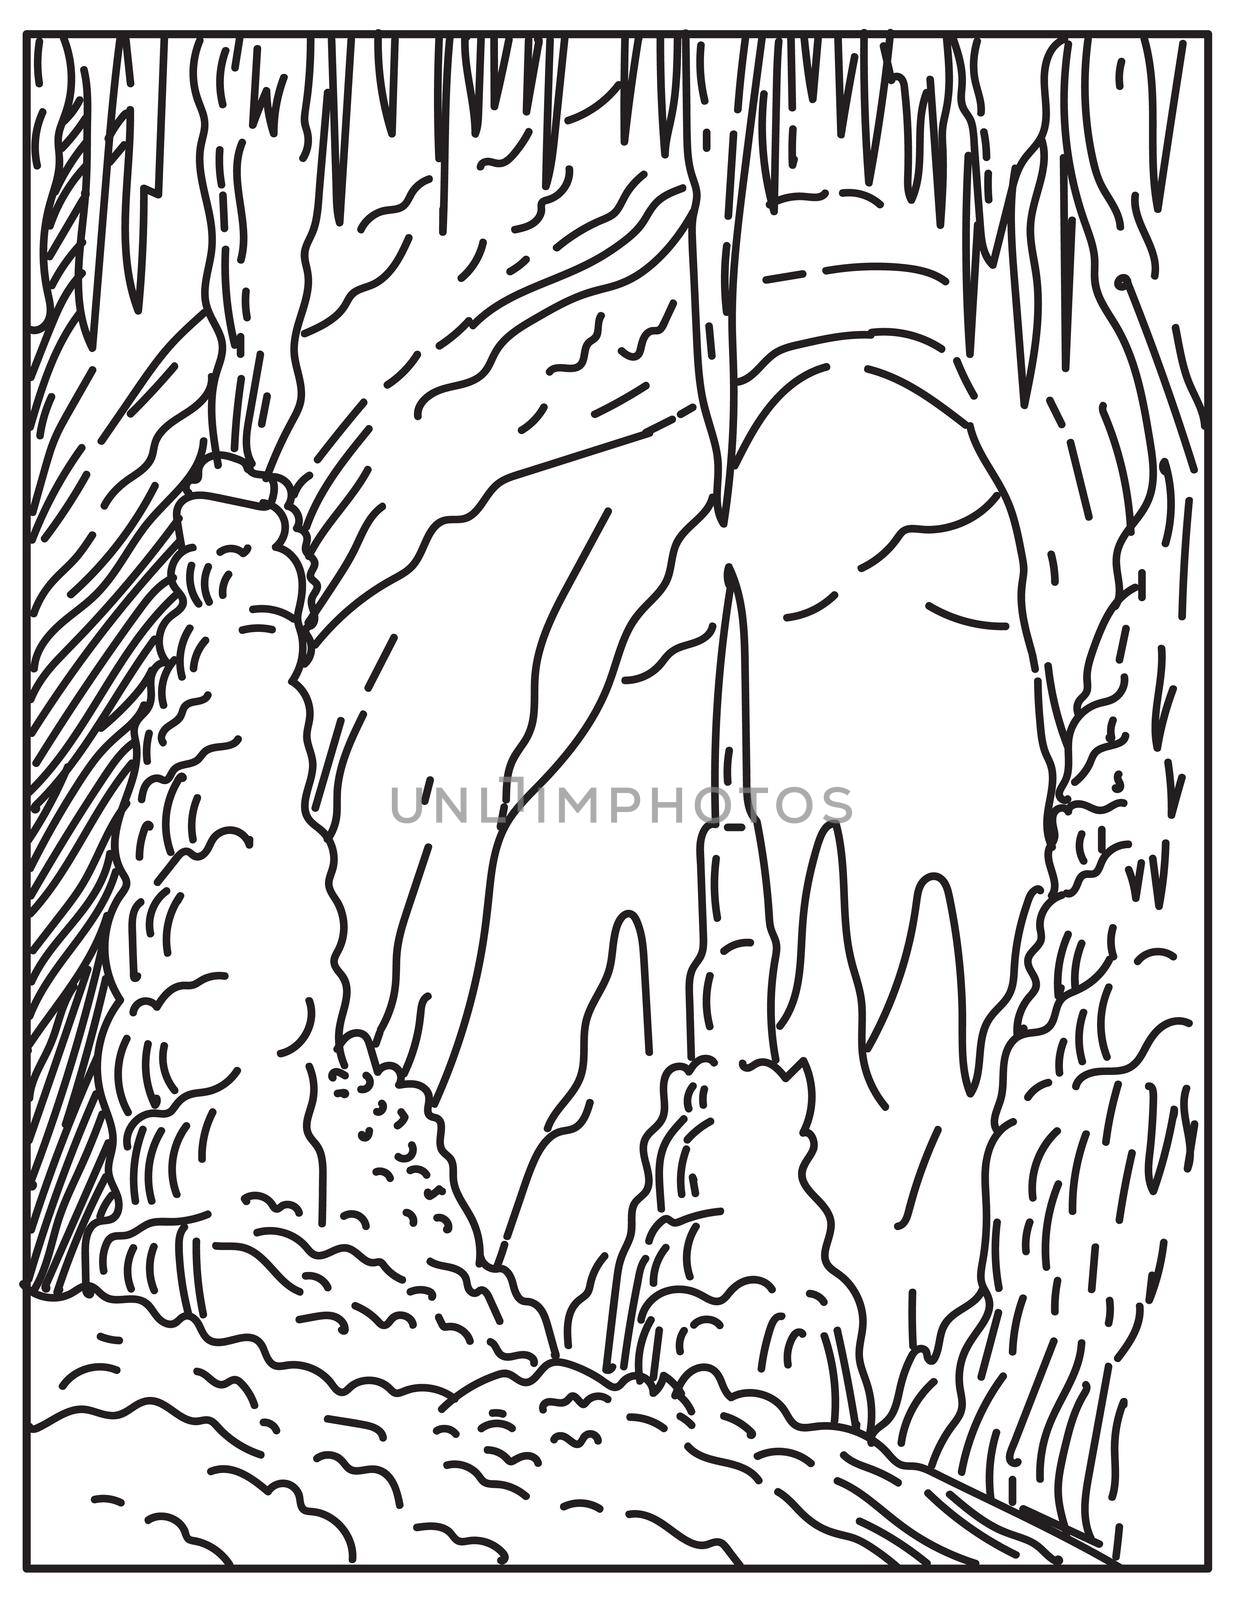 Mono line illustration of Carlsbad Caverns National Park in the Chihuahuan Desert of southern New Mexico, USA done in in retro black and white monoline line art style poster.